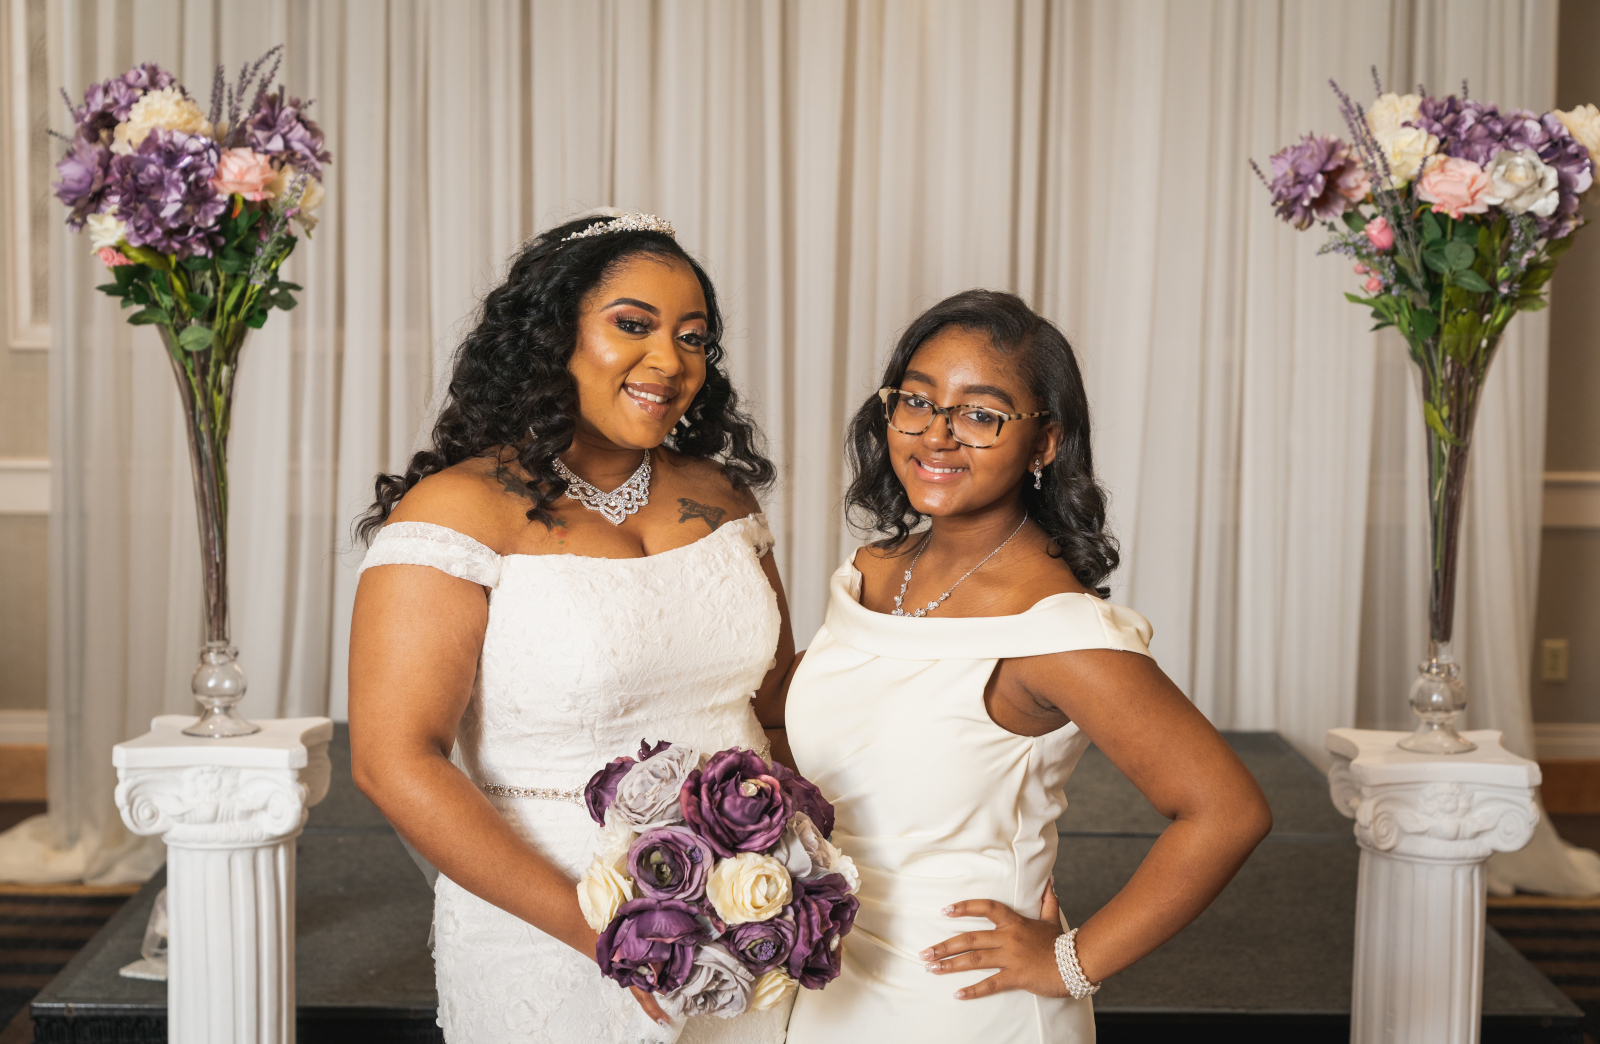 Bride with young girl, family portrait, African American bride, African American wedding, romantic wedding ceremony at Hilton Akron/Fairlawn